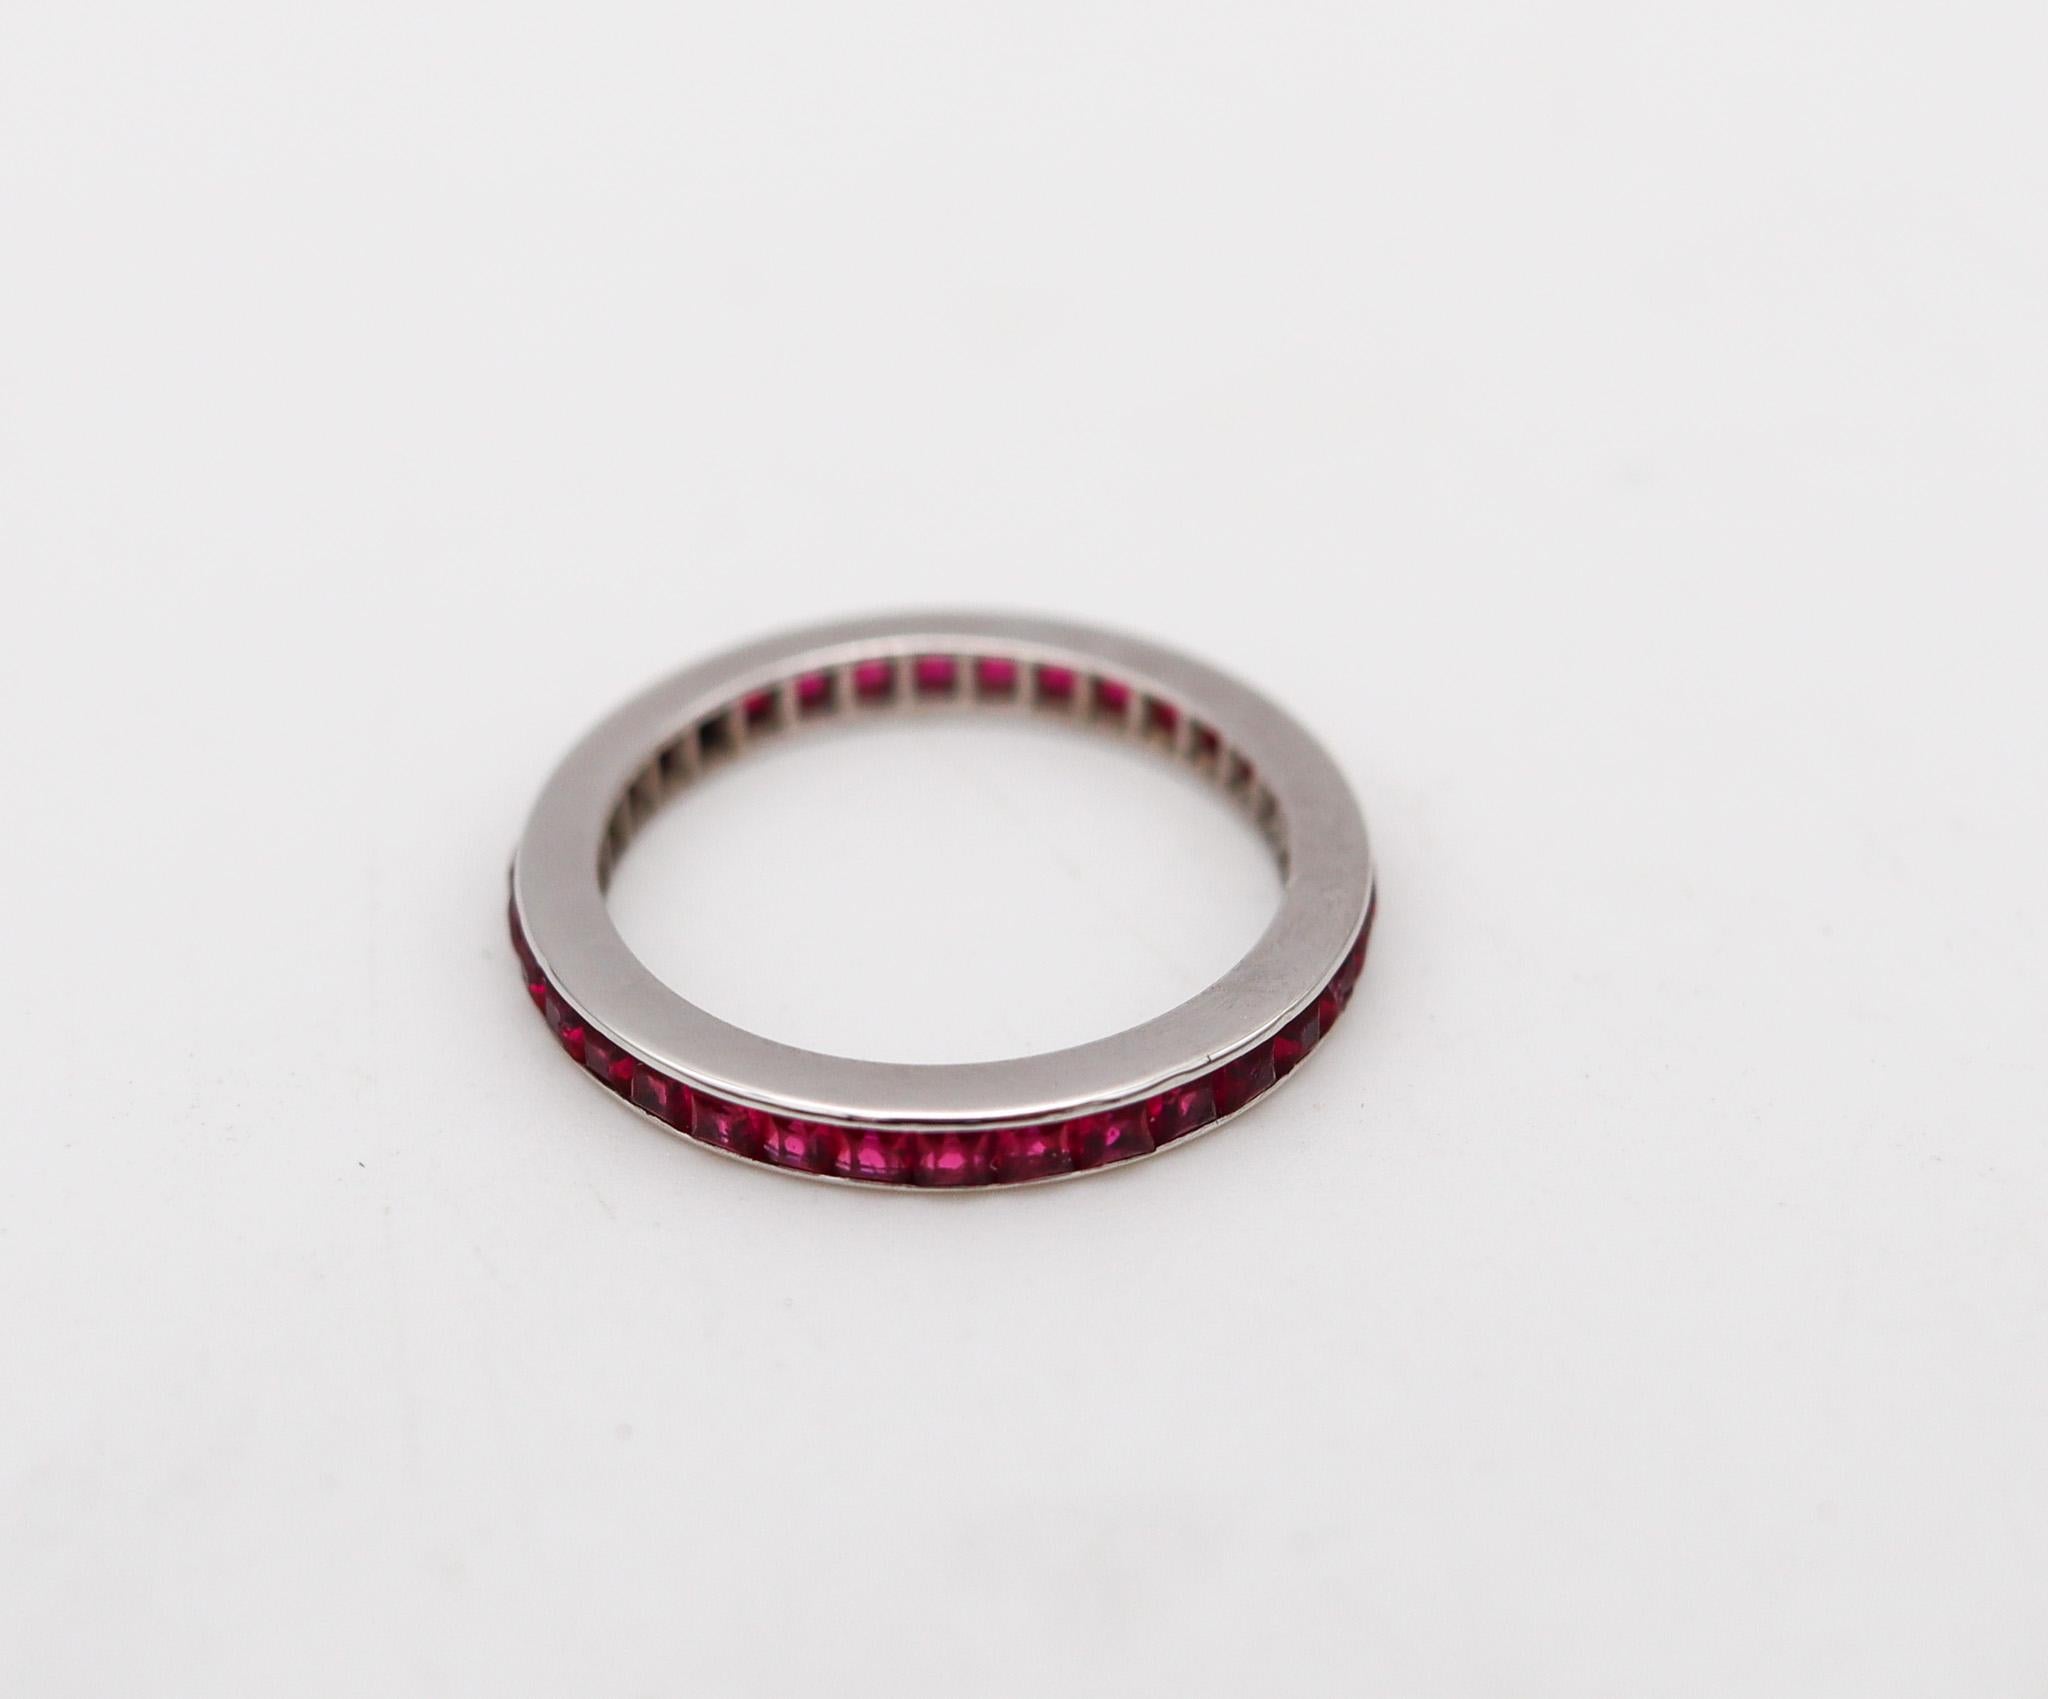 A suite of two eternity bands with rubies.

Beautiful matching pair (2) of eternity bands rings crafted in solid white gold of 18 karats, with high polished finish. Recently polished and finished with rhodium plating.

Rubies: Mount in a channel